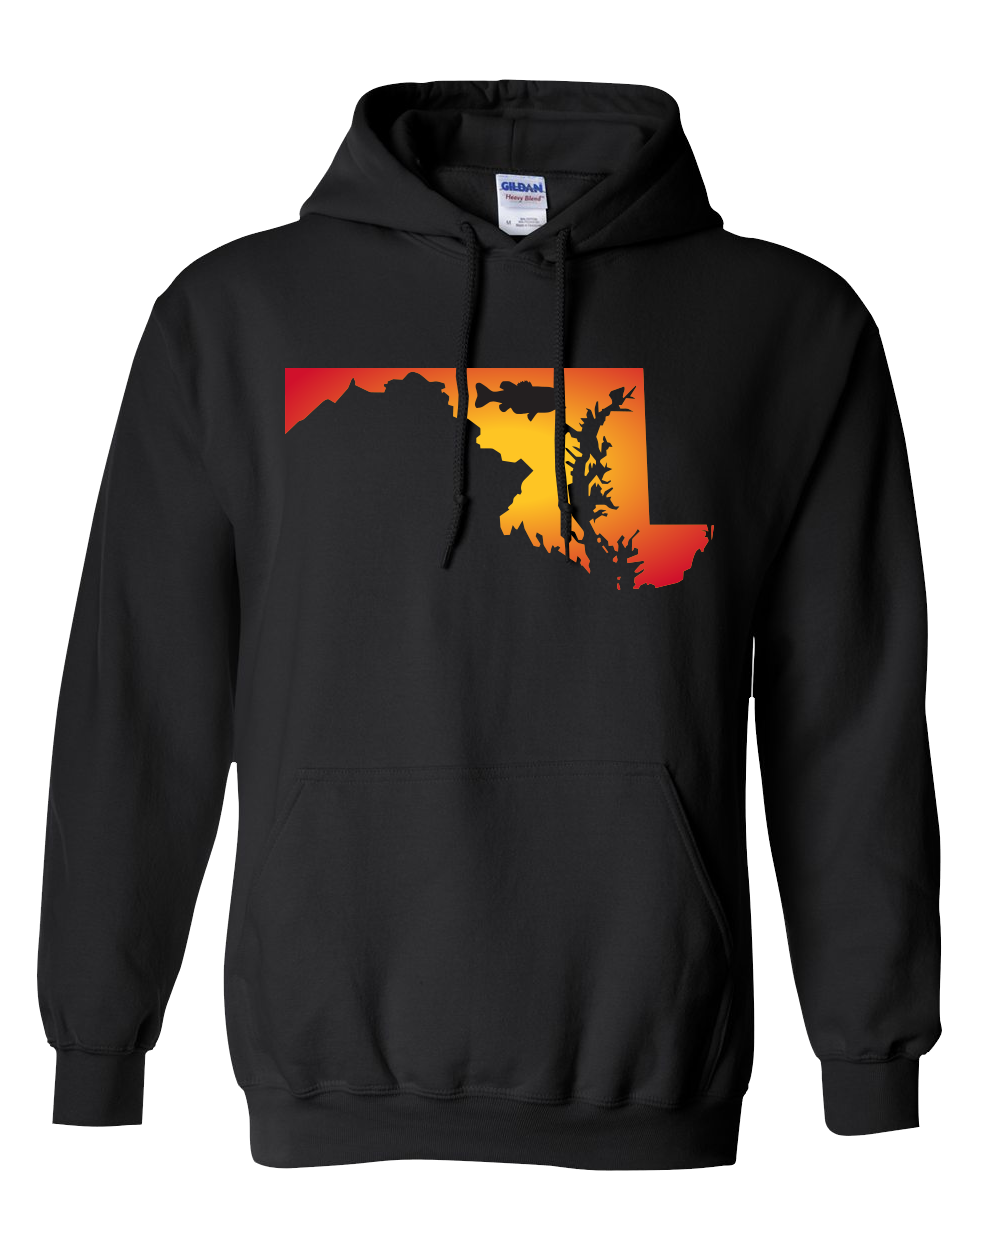 Pullover Hooded Sweatshirt Maryland Black Large Mouth Bass Vibrant Design High Quality Tight Knit Ring Spun Low Maintenance Cotton Printed With The Newest Available Color Transfer Technology